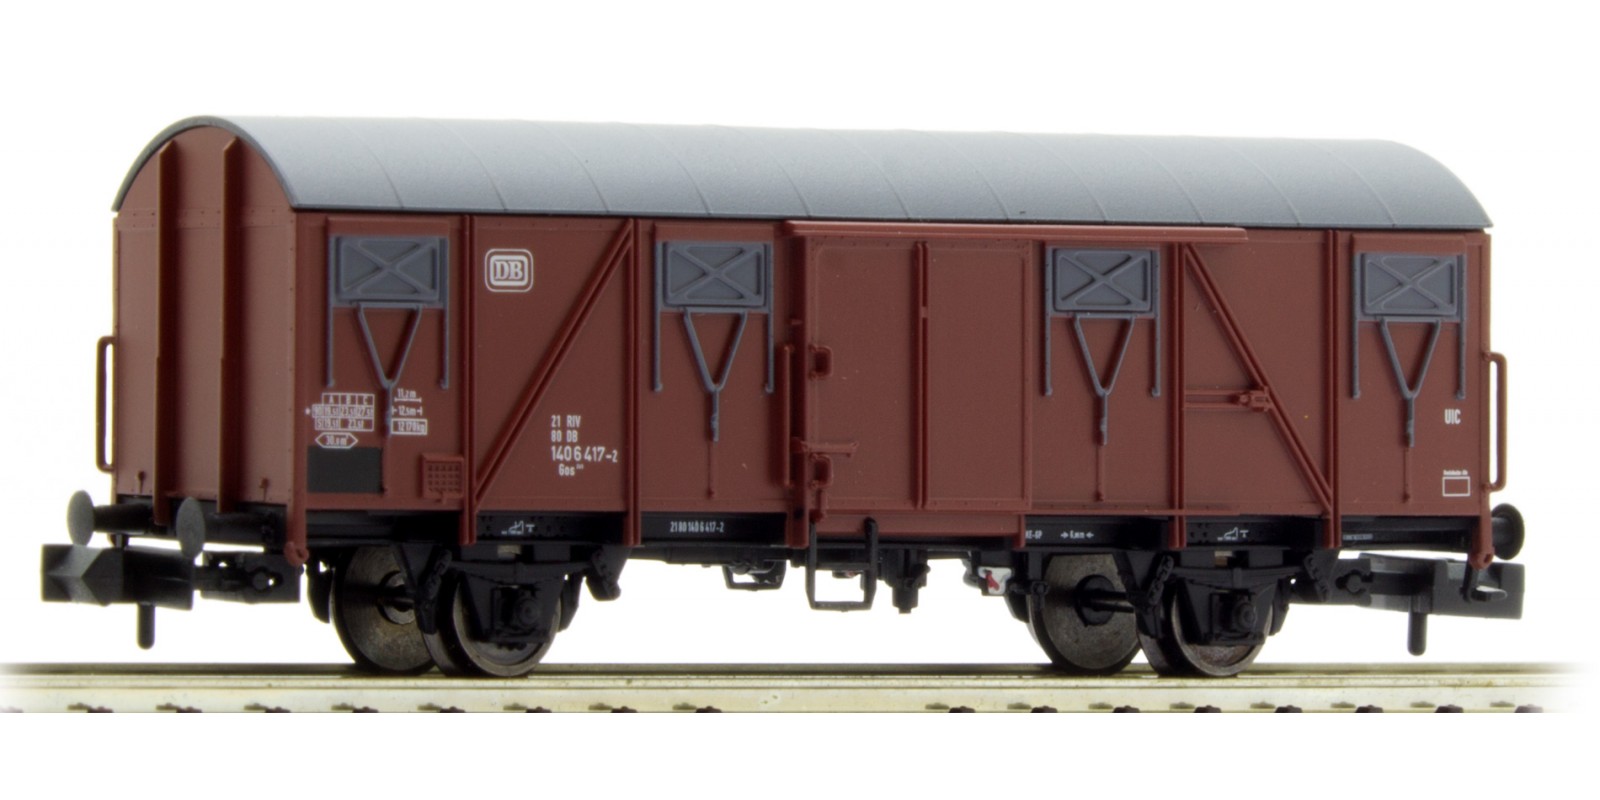 BR67801 COVERED FREIGHT CAR GOS 245 DB AG